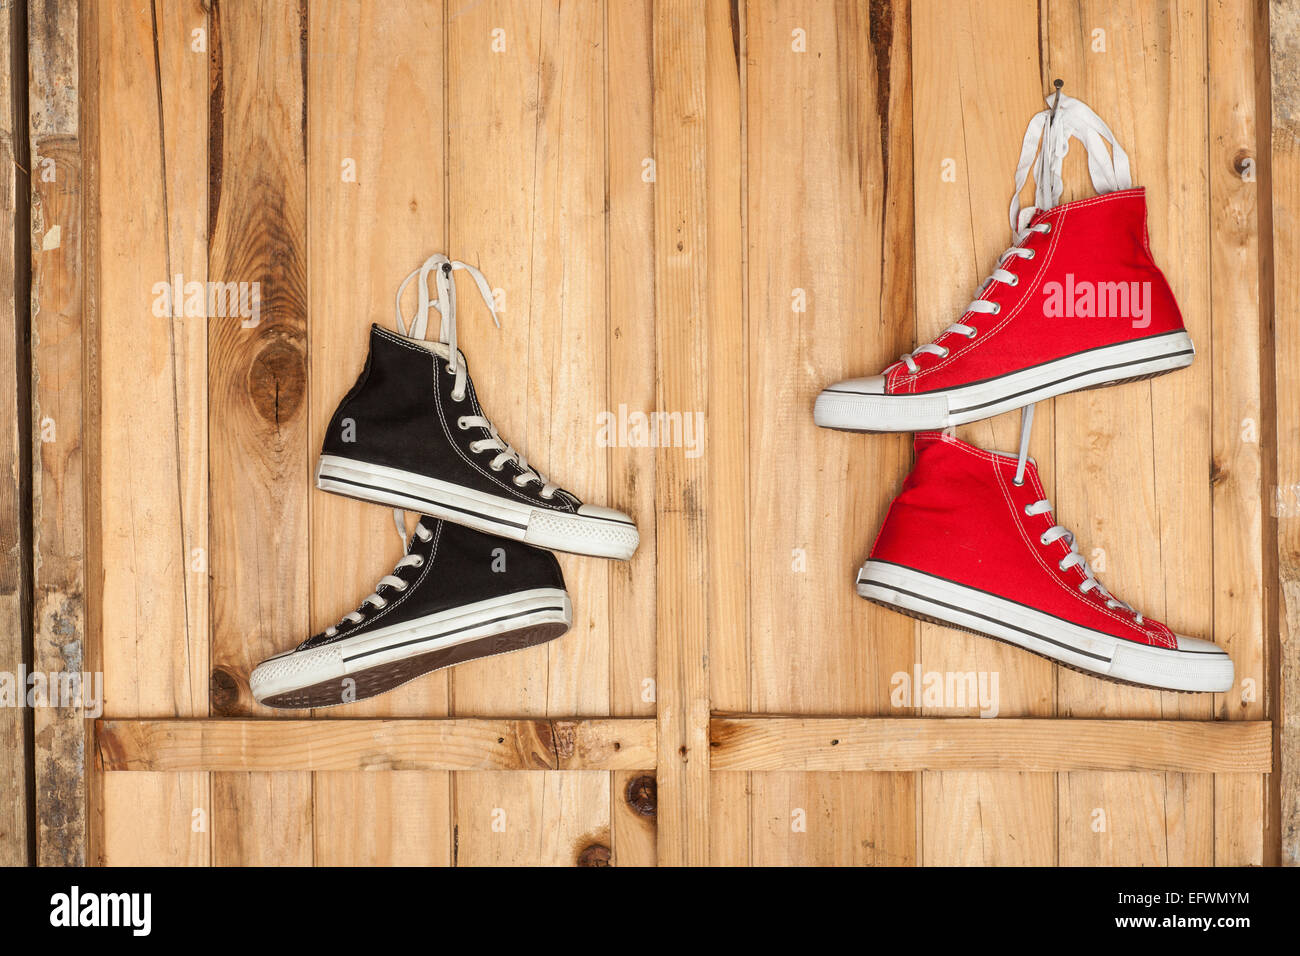 Converse Shoes Hanging High Resolution Stock Photography and Images - Alamy